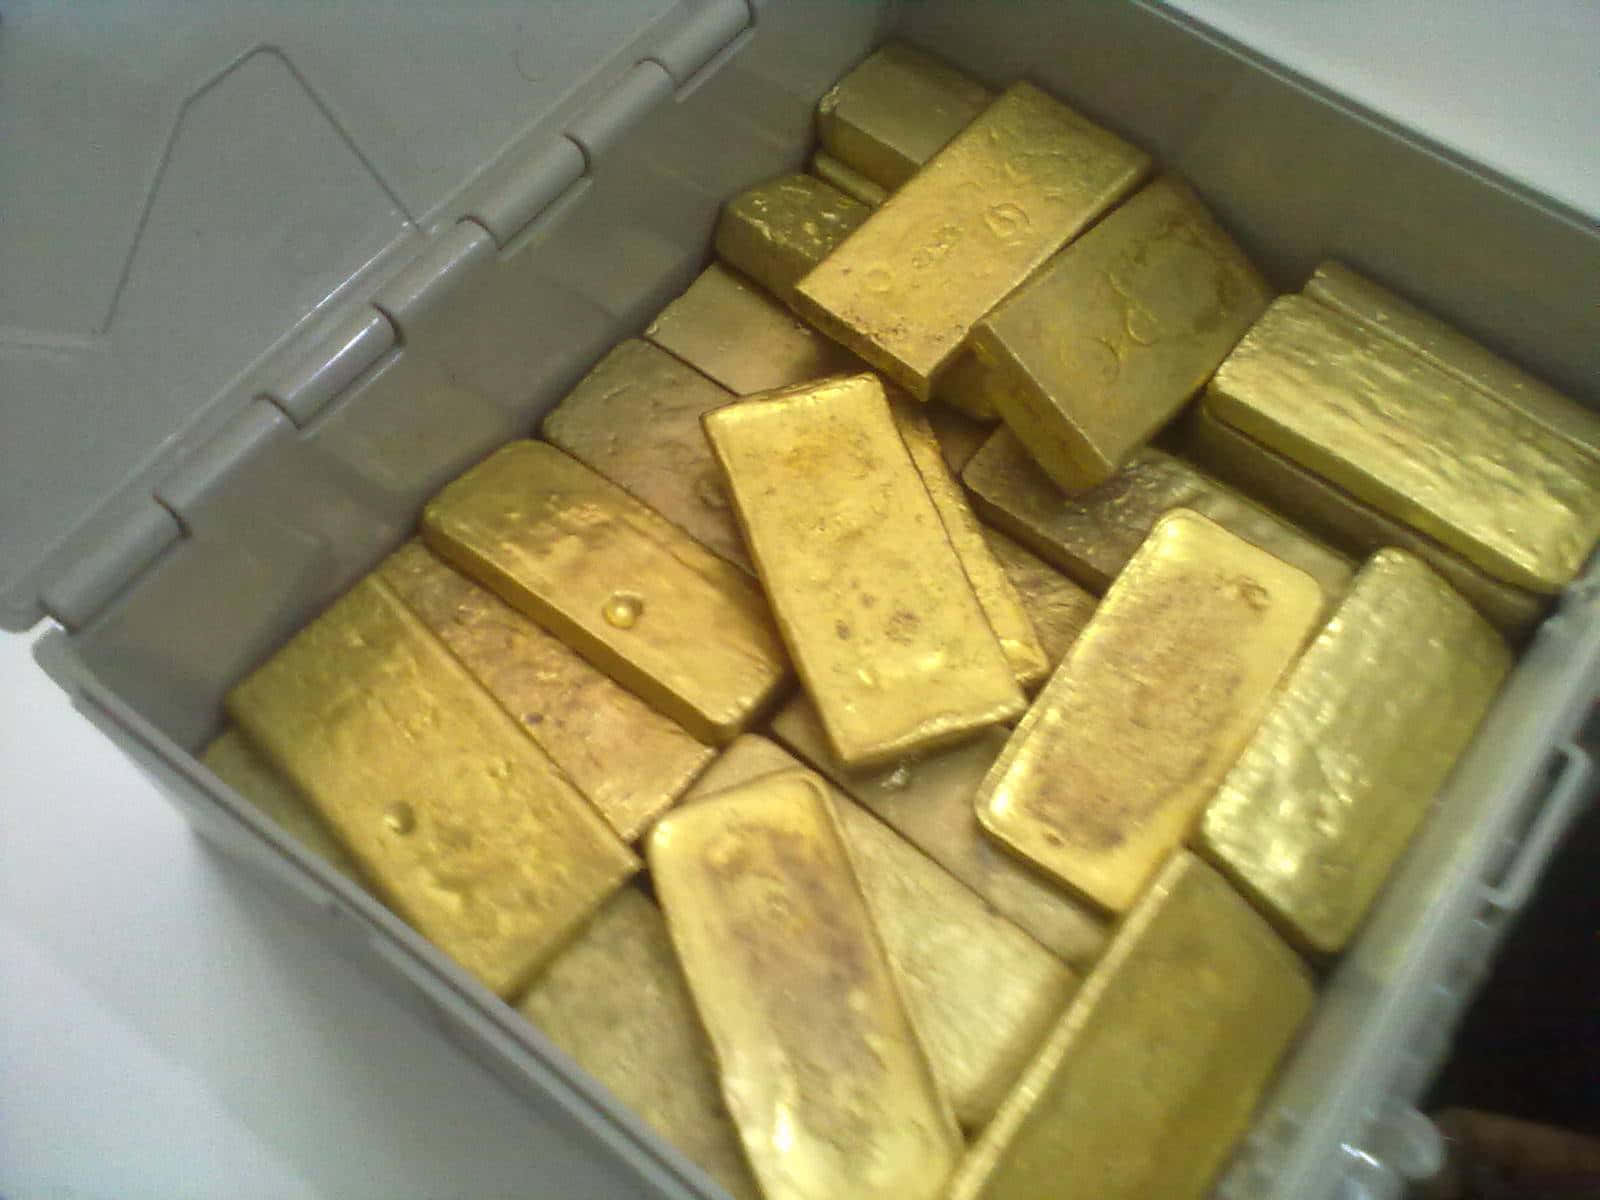 A Box Of Gold Bars Sitting On A Table